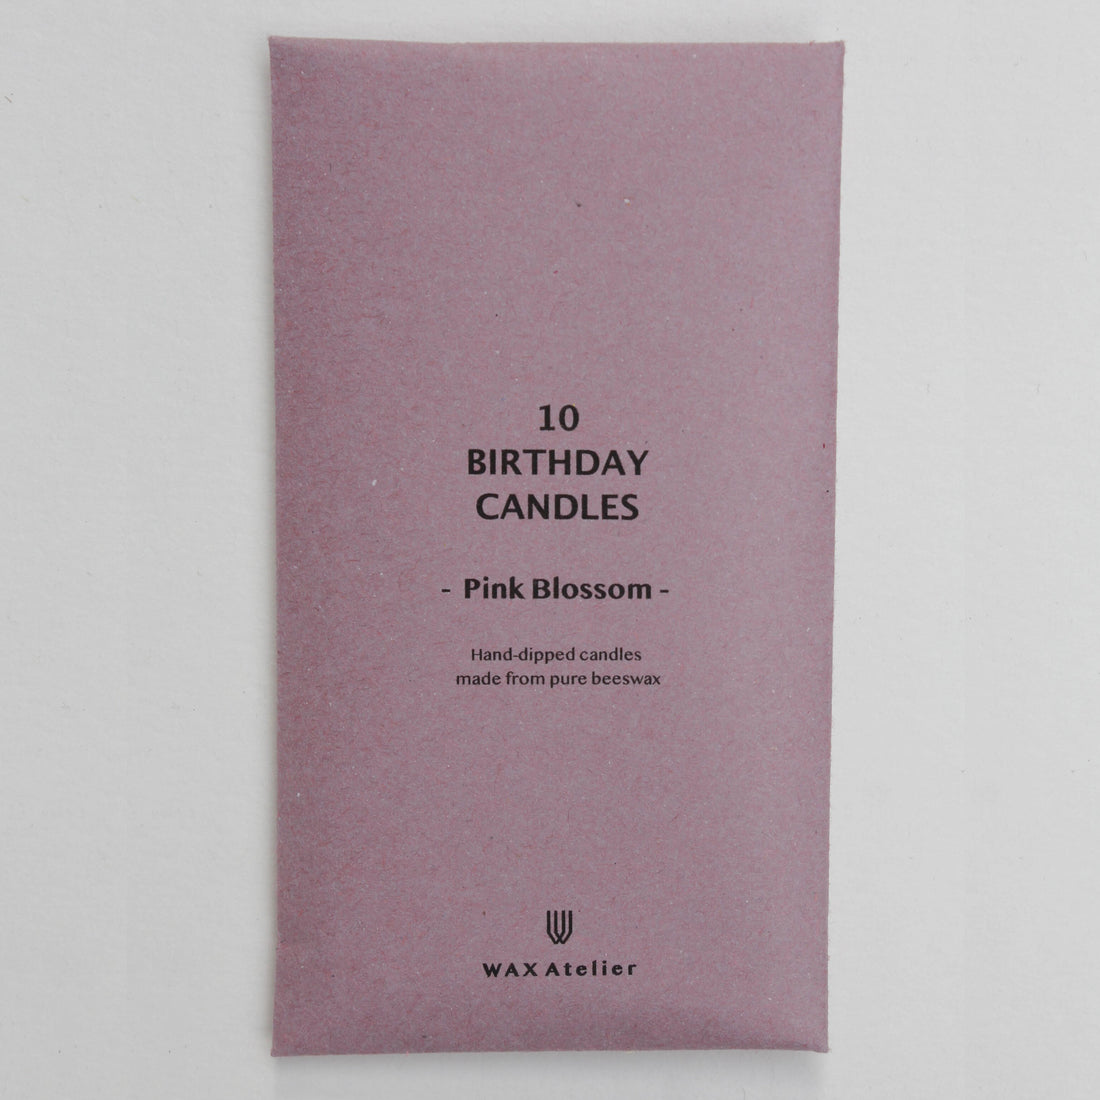 10 BEESWAX BIRTHDAY CANDLES | PINK BLOSSOM